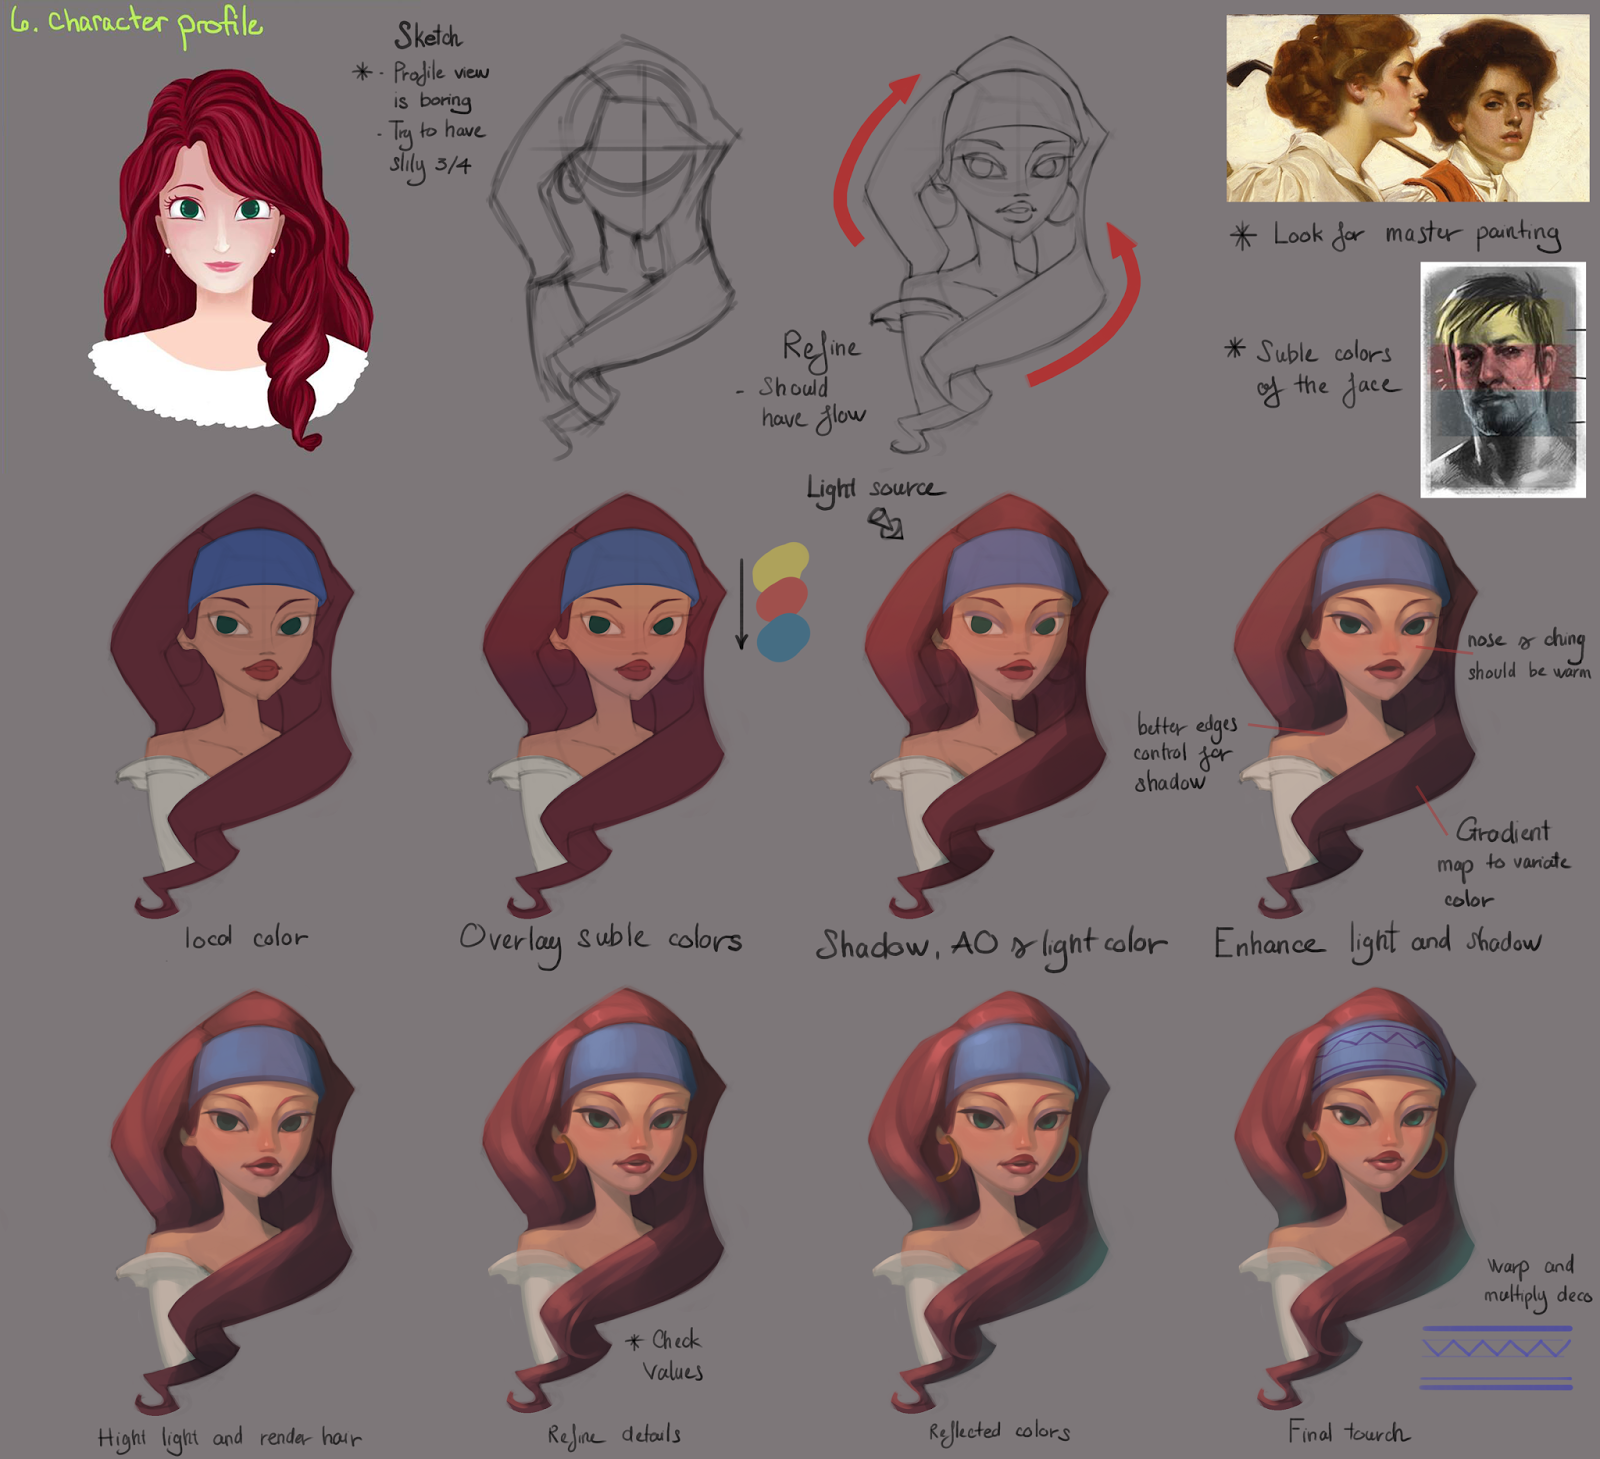 Duy's Sketch Book: Digital painting exercises